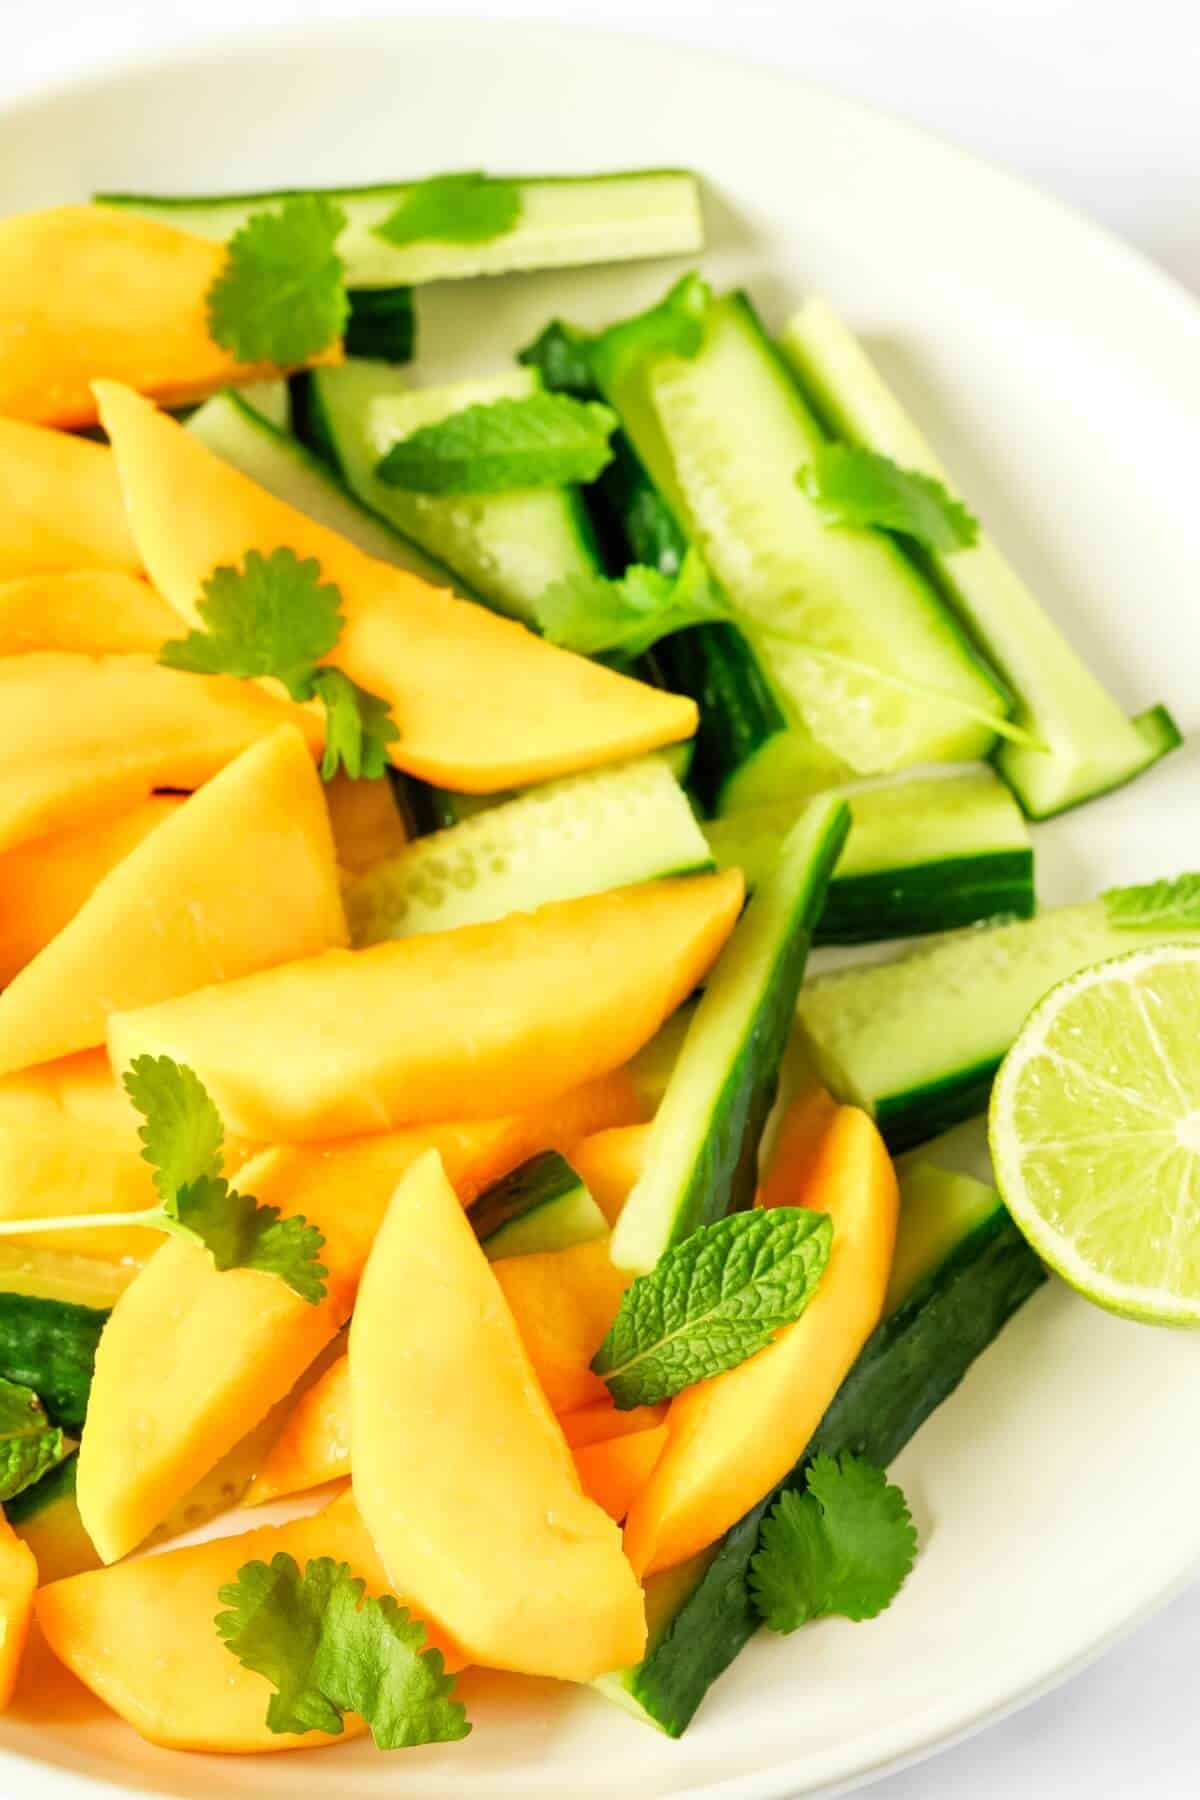 Cucumber and mango slices with fresh herbs.